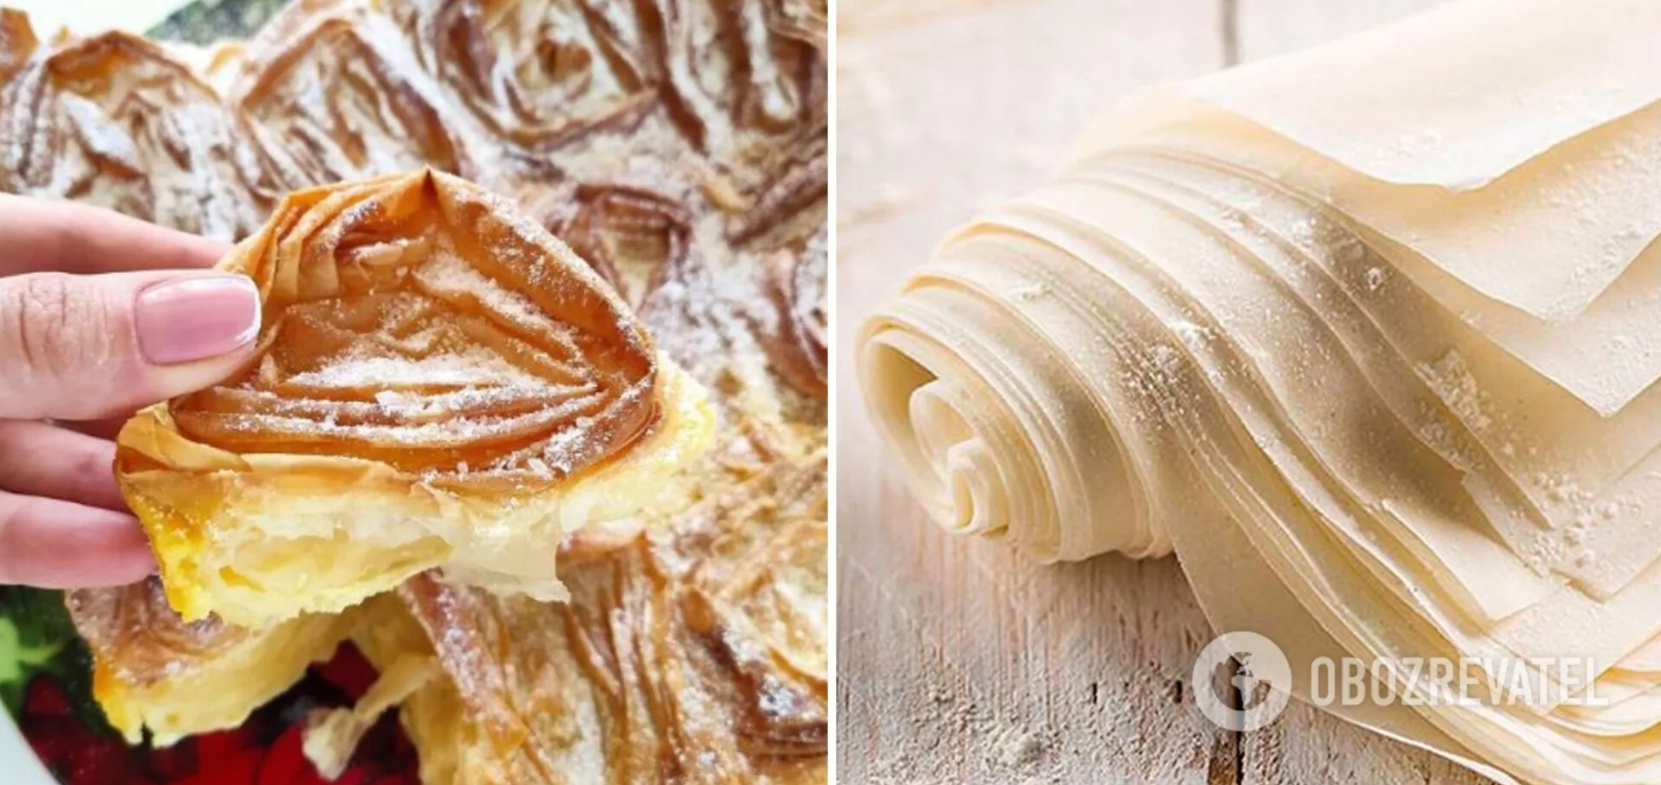 What to make with phyllo dough